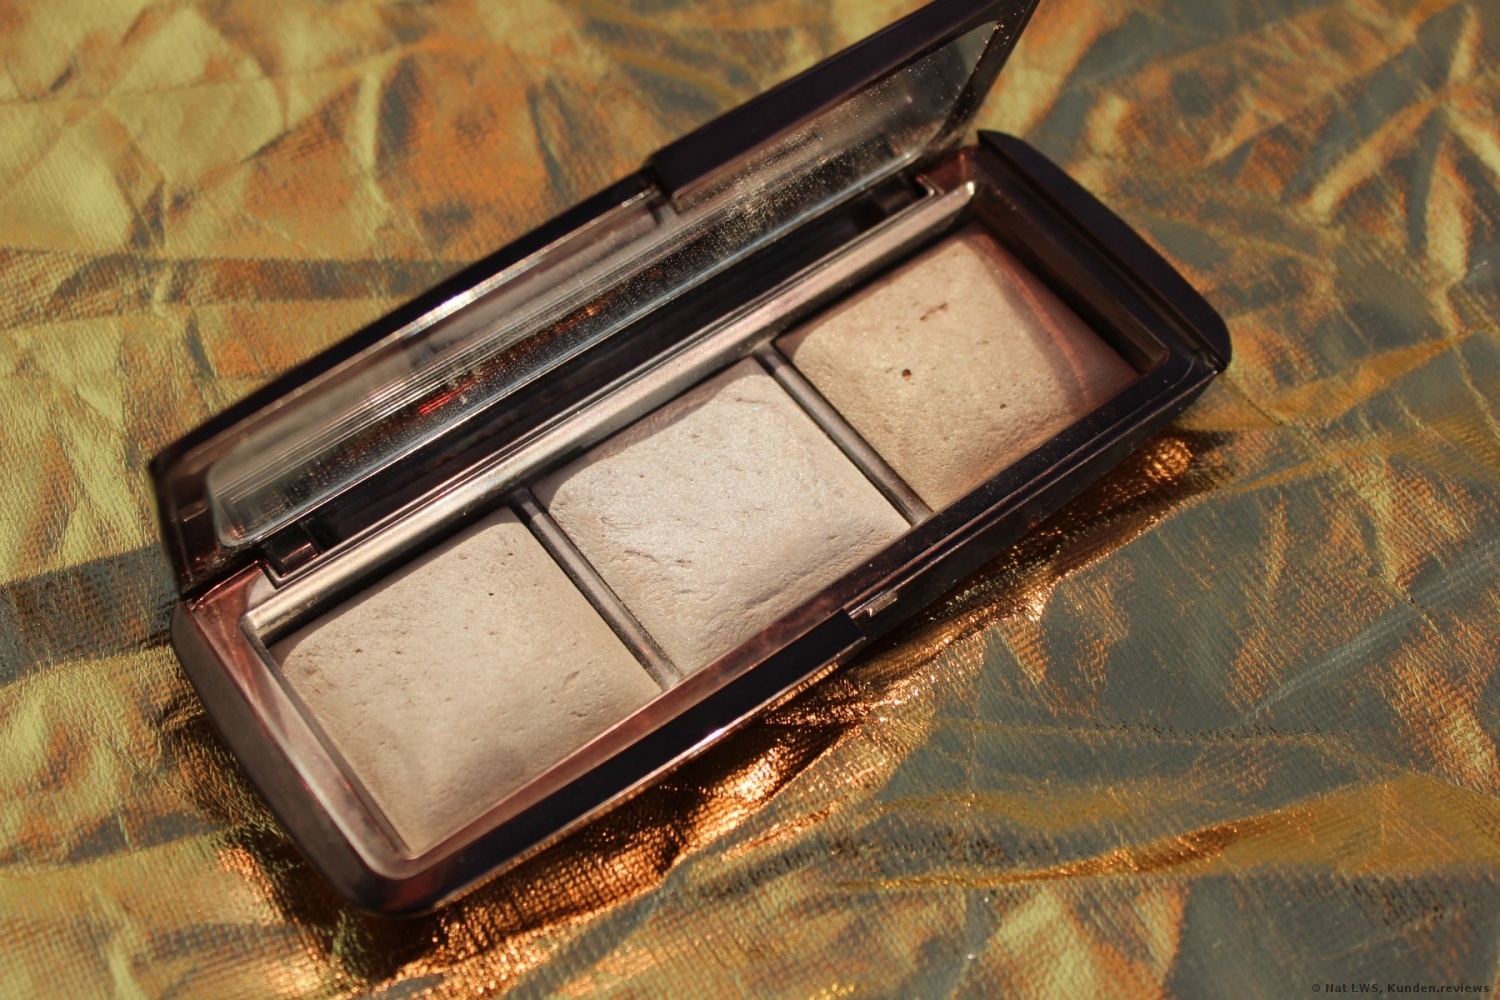 Hourglass Ambient Lighting Palette Foto